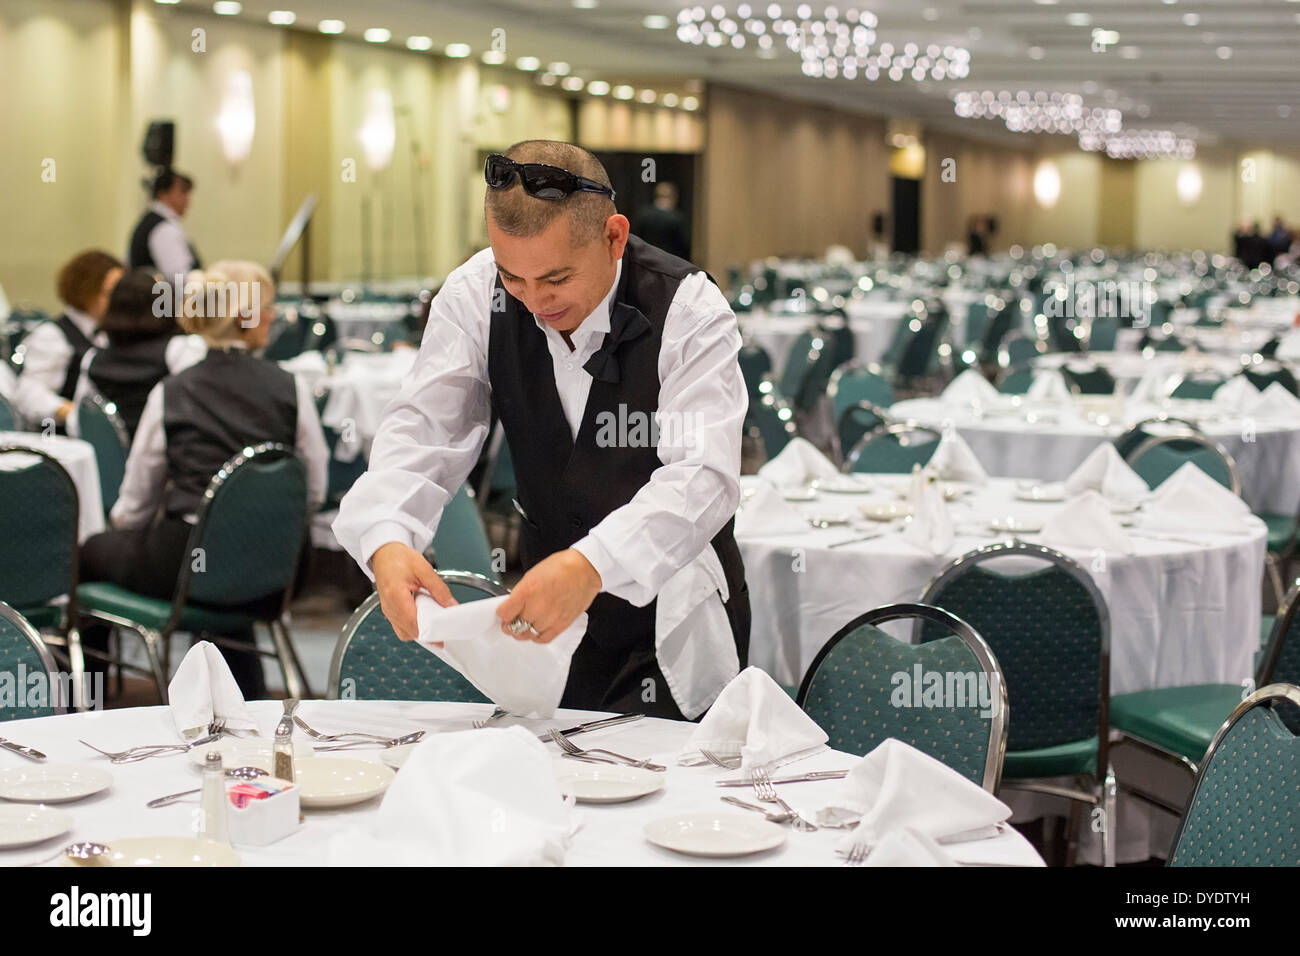 Rosemont, Illinois - A worker prepares for a banquet at the Crown Plaza Chicago O'Hare hotel. Stock Photo